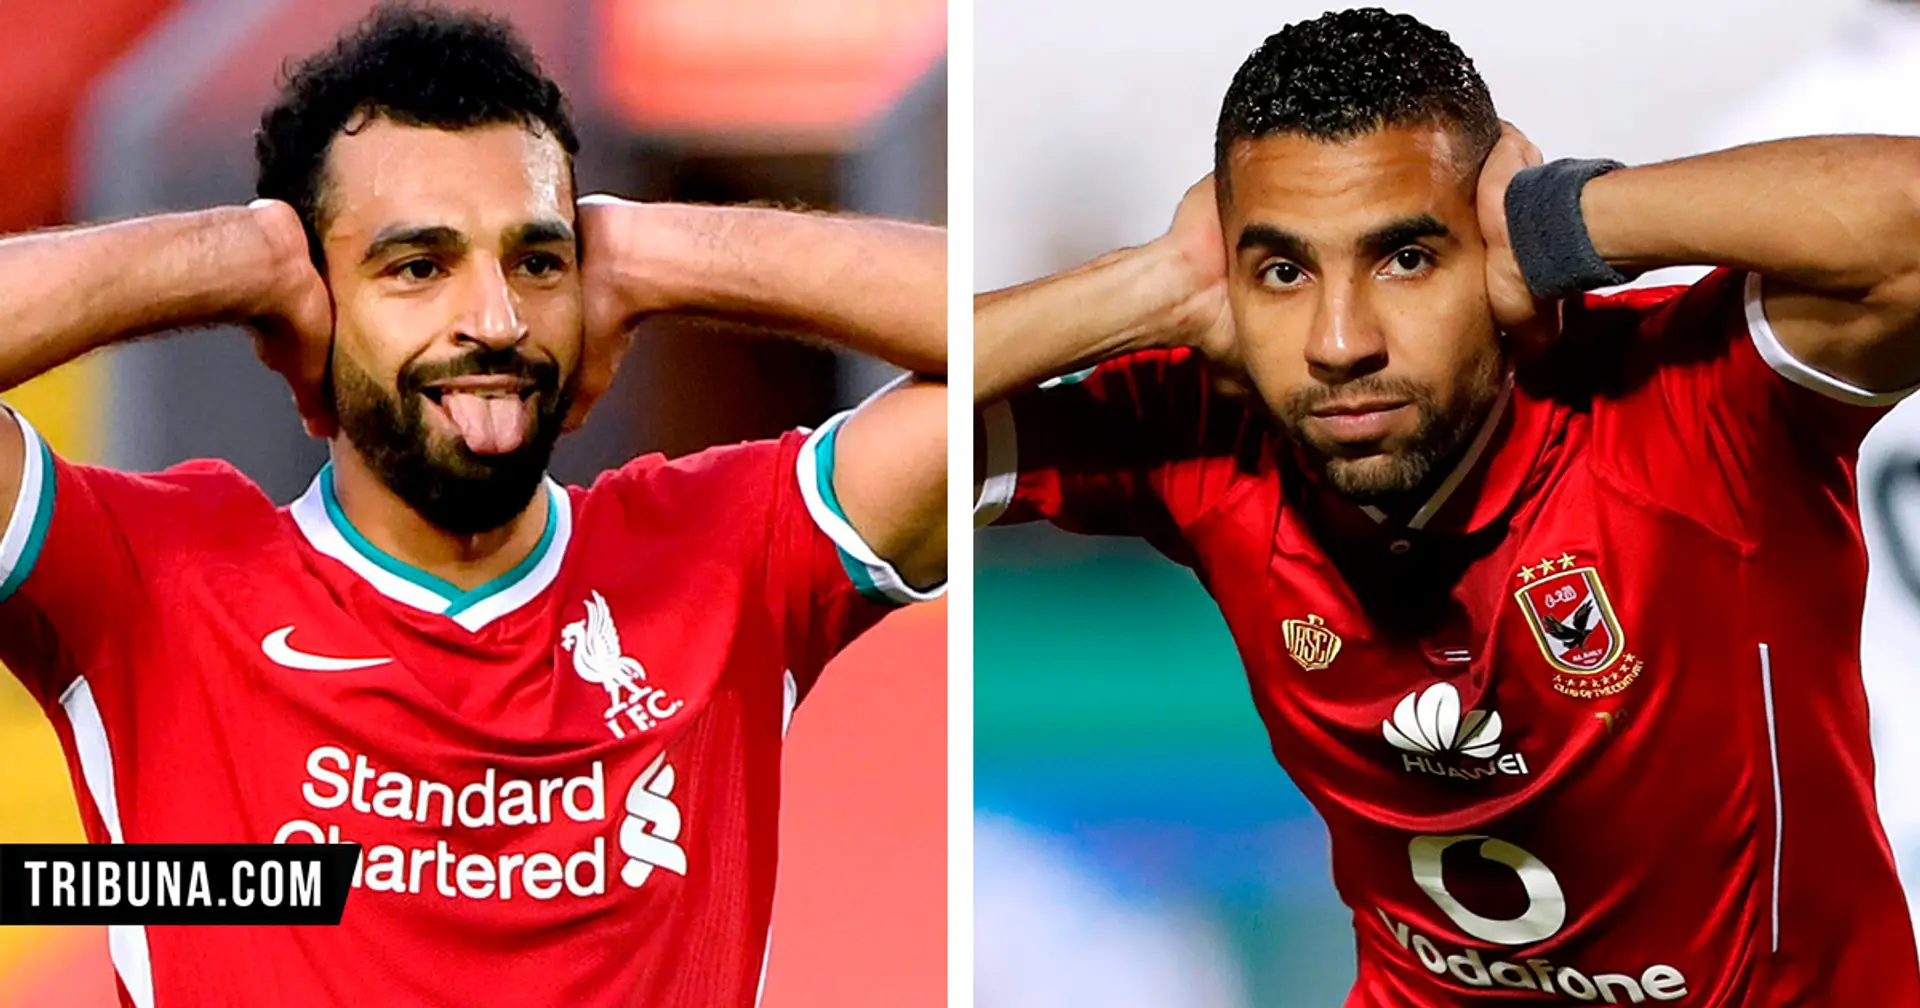 Mohamed Salah dedicates third-goal celebration to his friend Moamen Zakaria who had to quit football due to rare nervous system disease